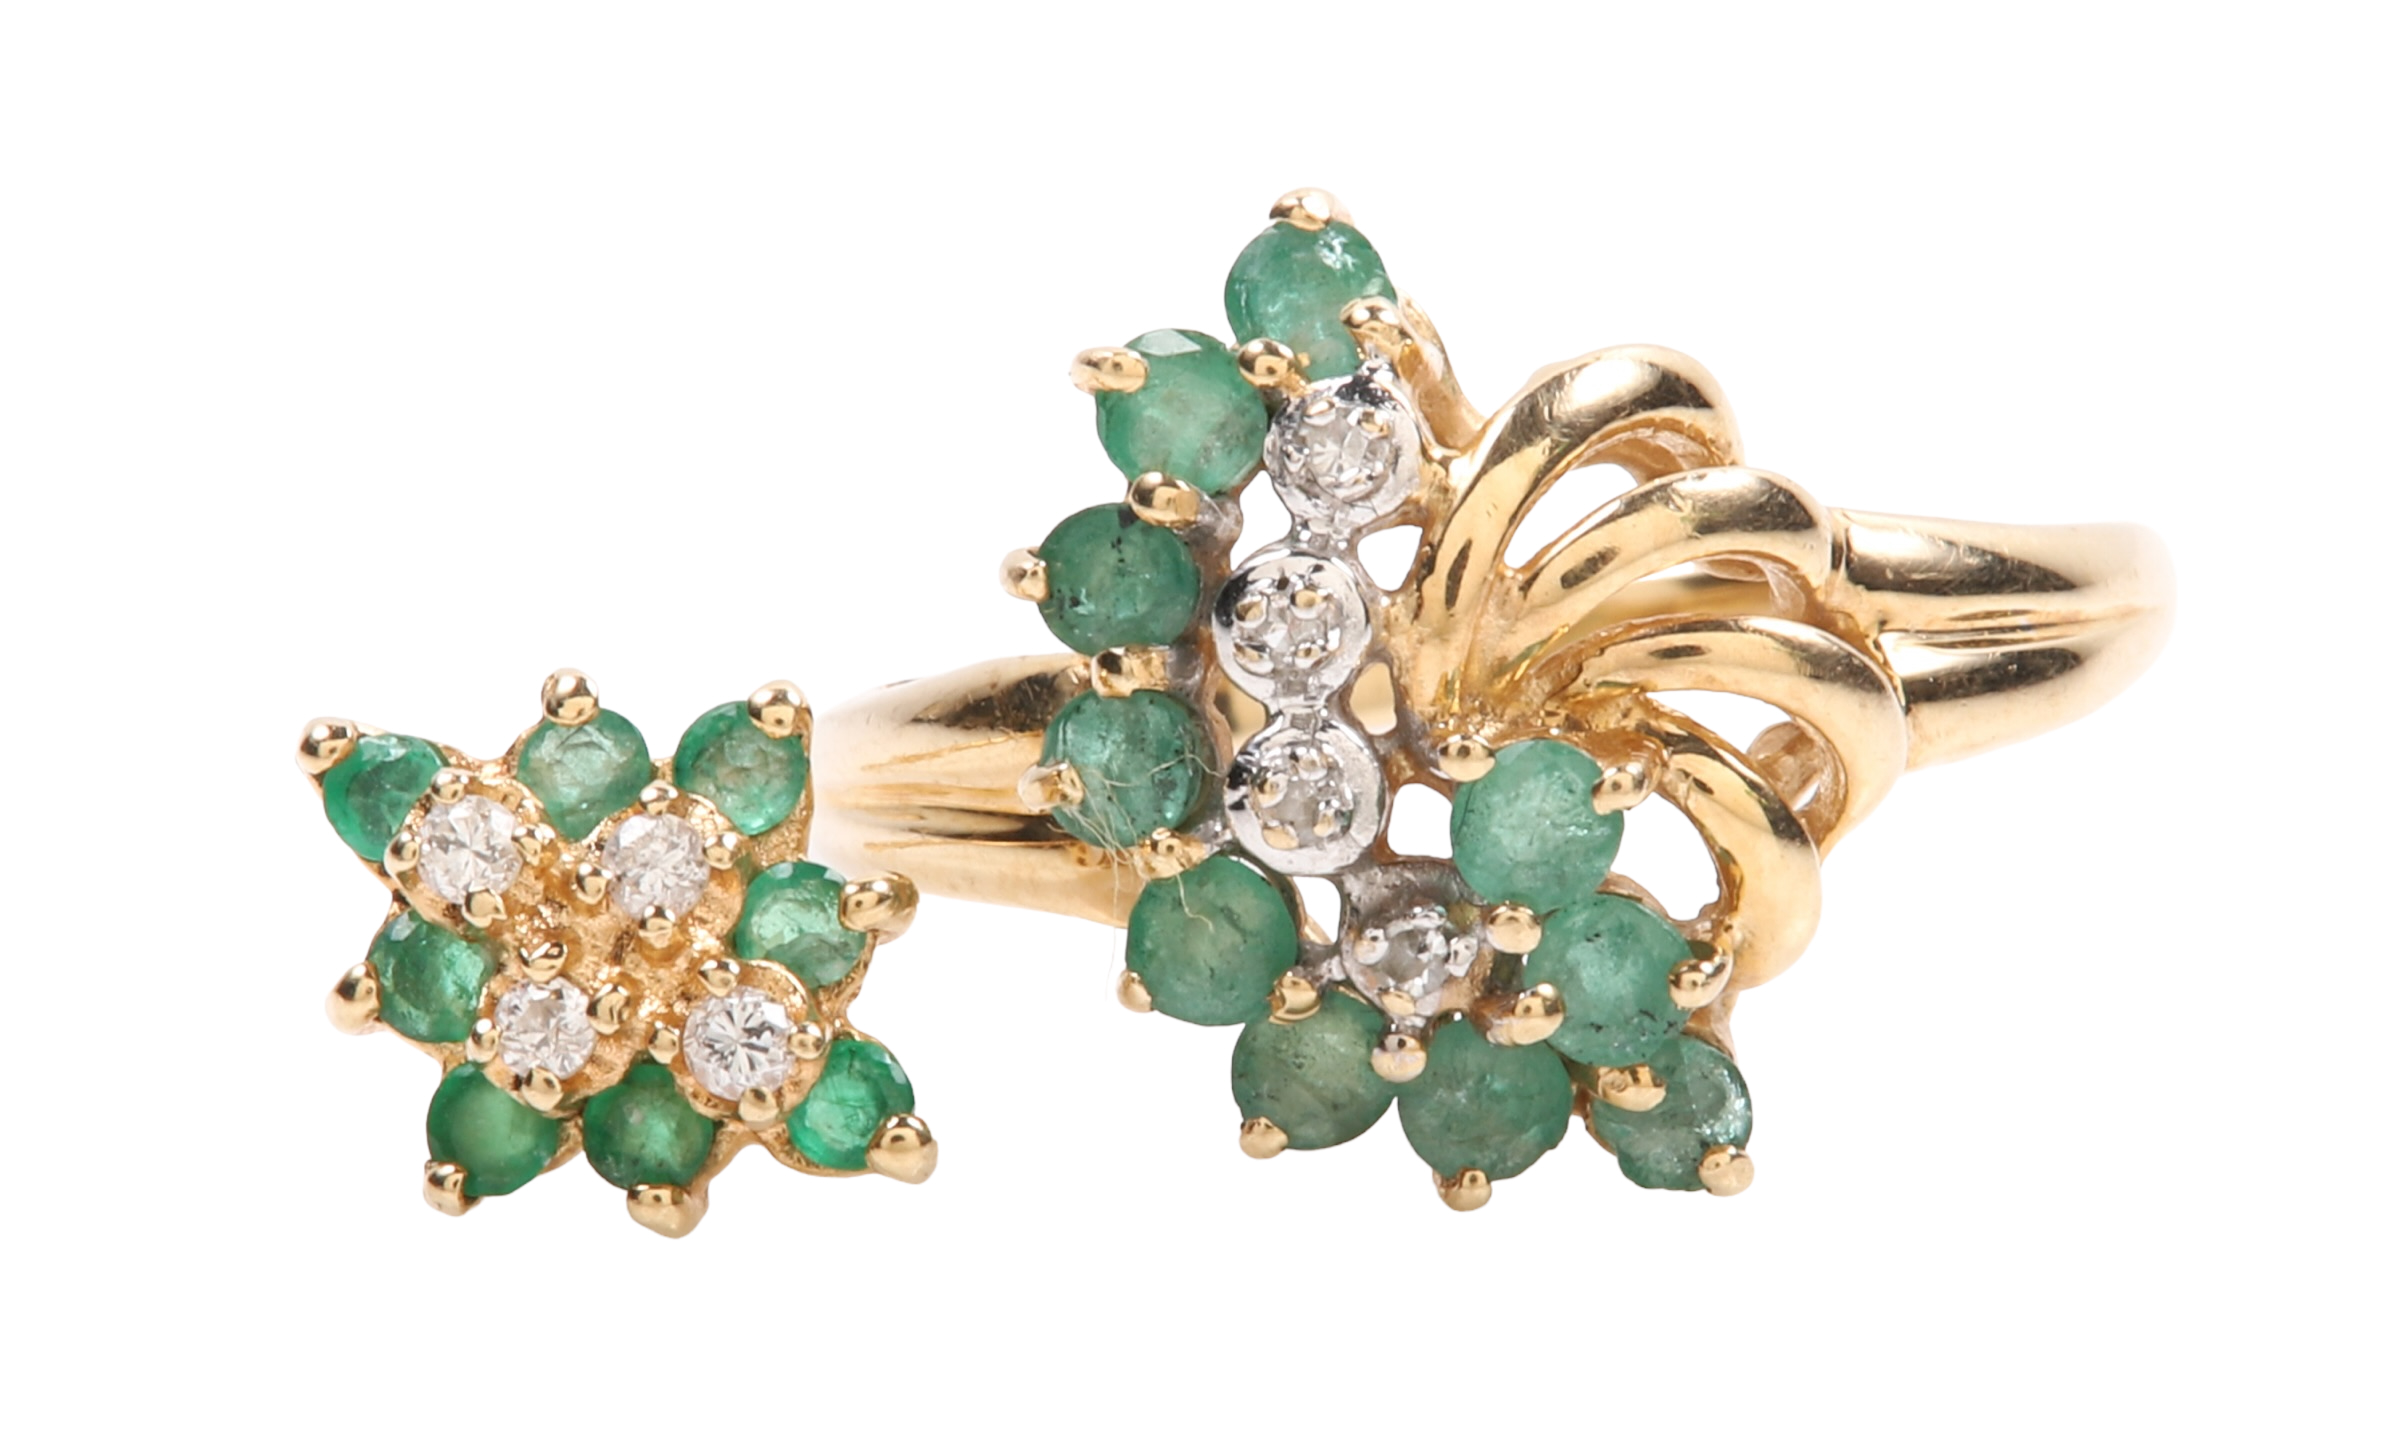 14K YG green stone ring and earring 317e76